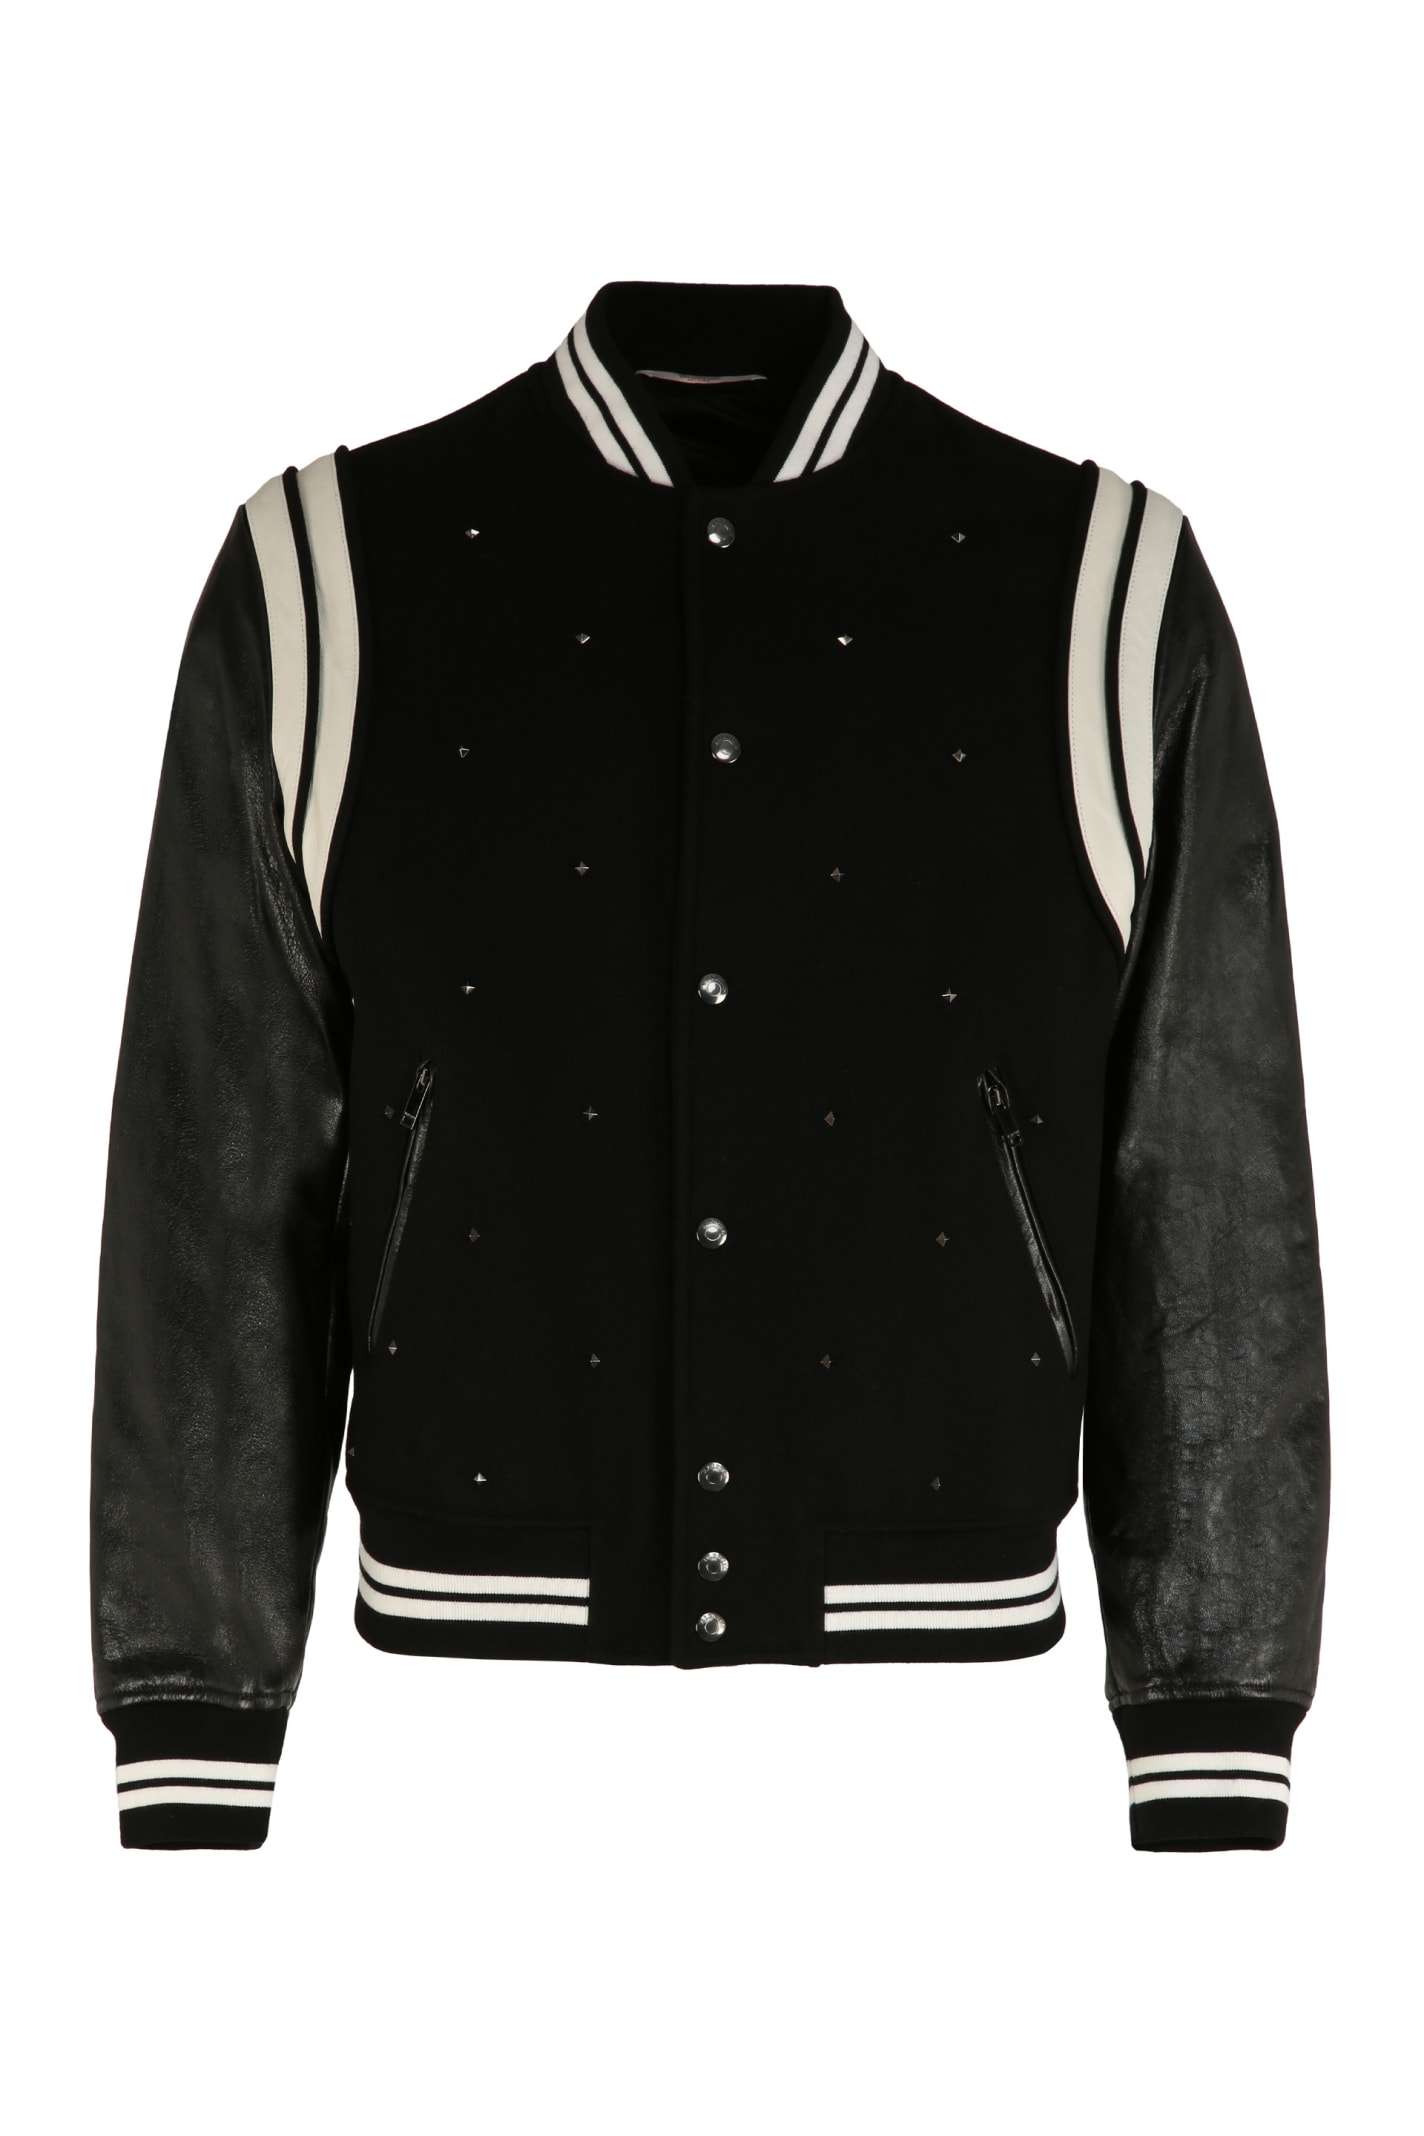 Valentino Wool And Leather Bomber Jacket